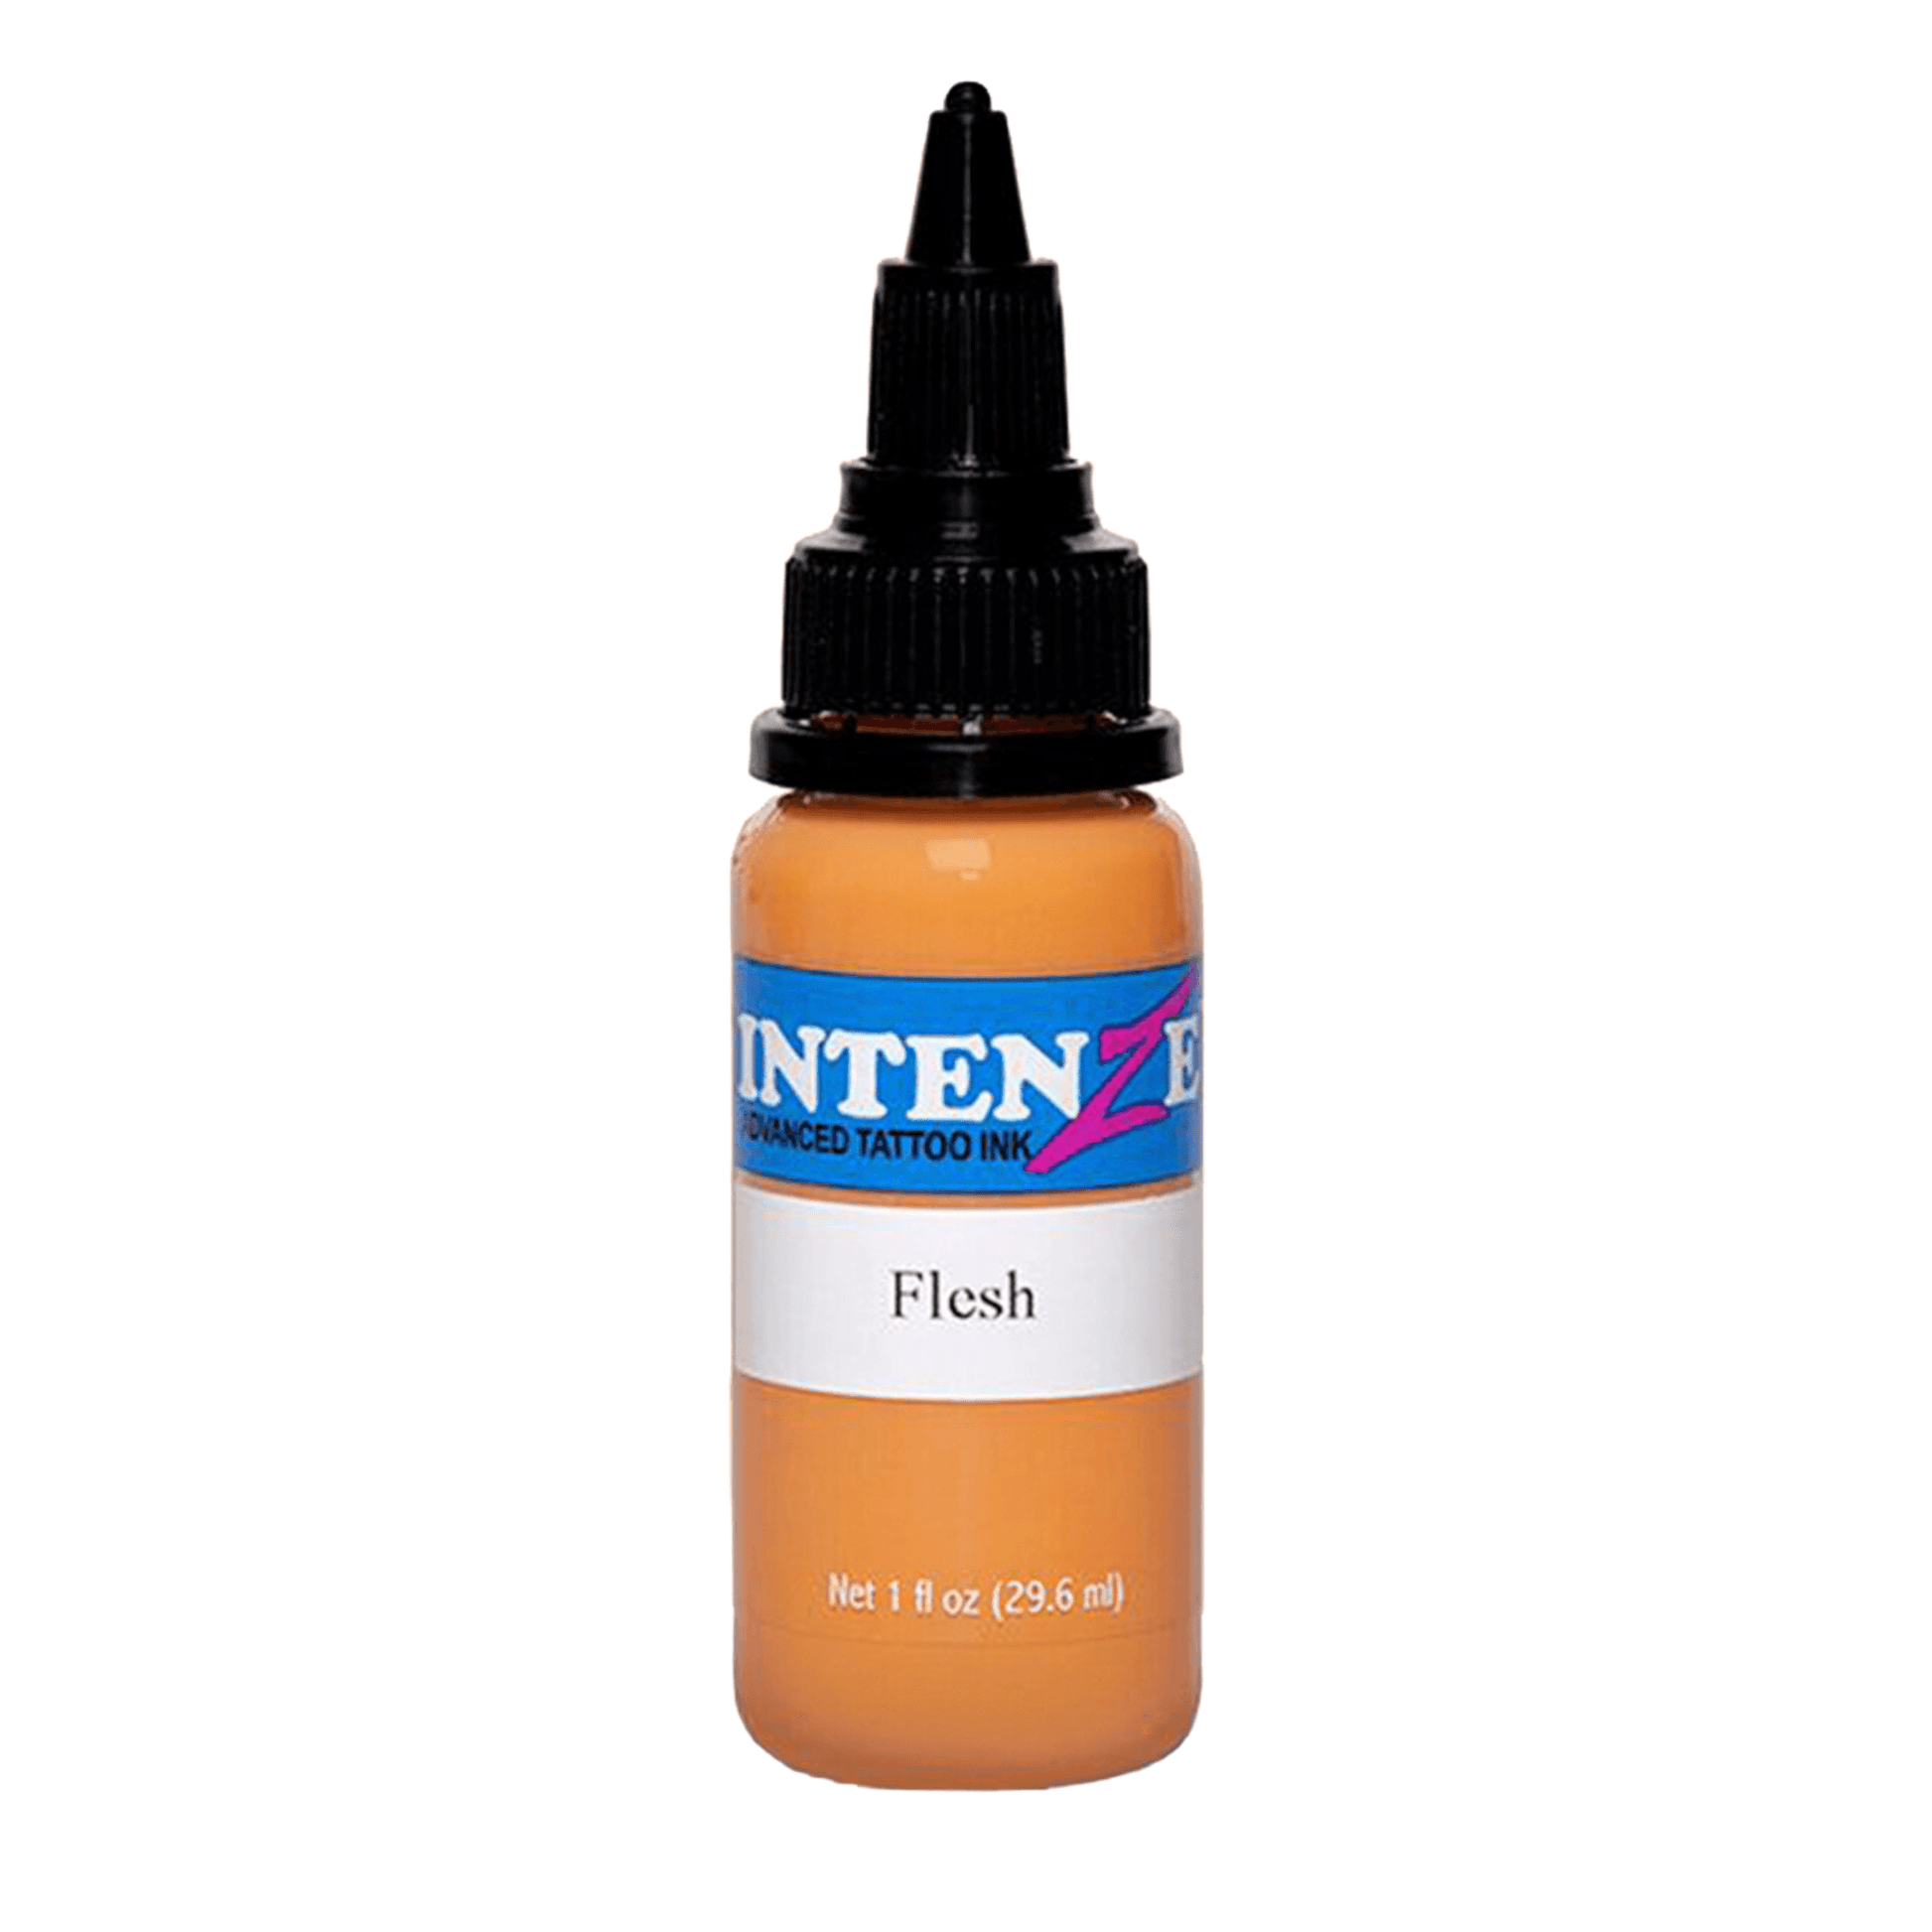 Intenze Selection Couleur 1oz - Lucifer Tattoo Supply